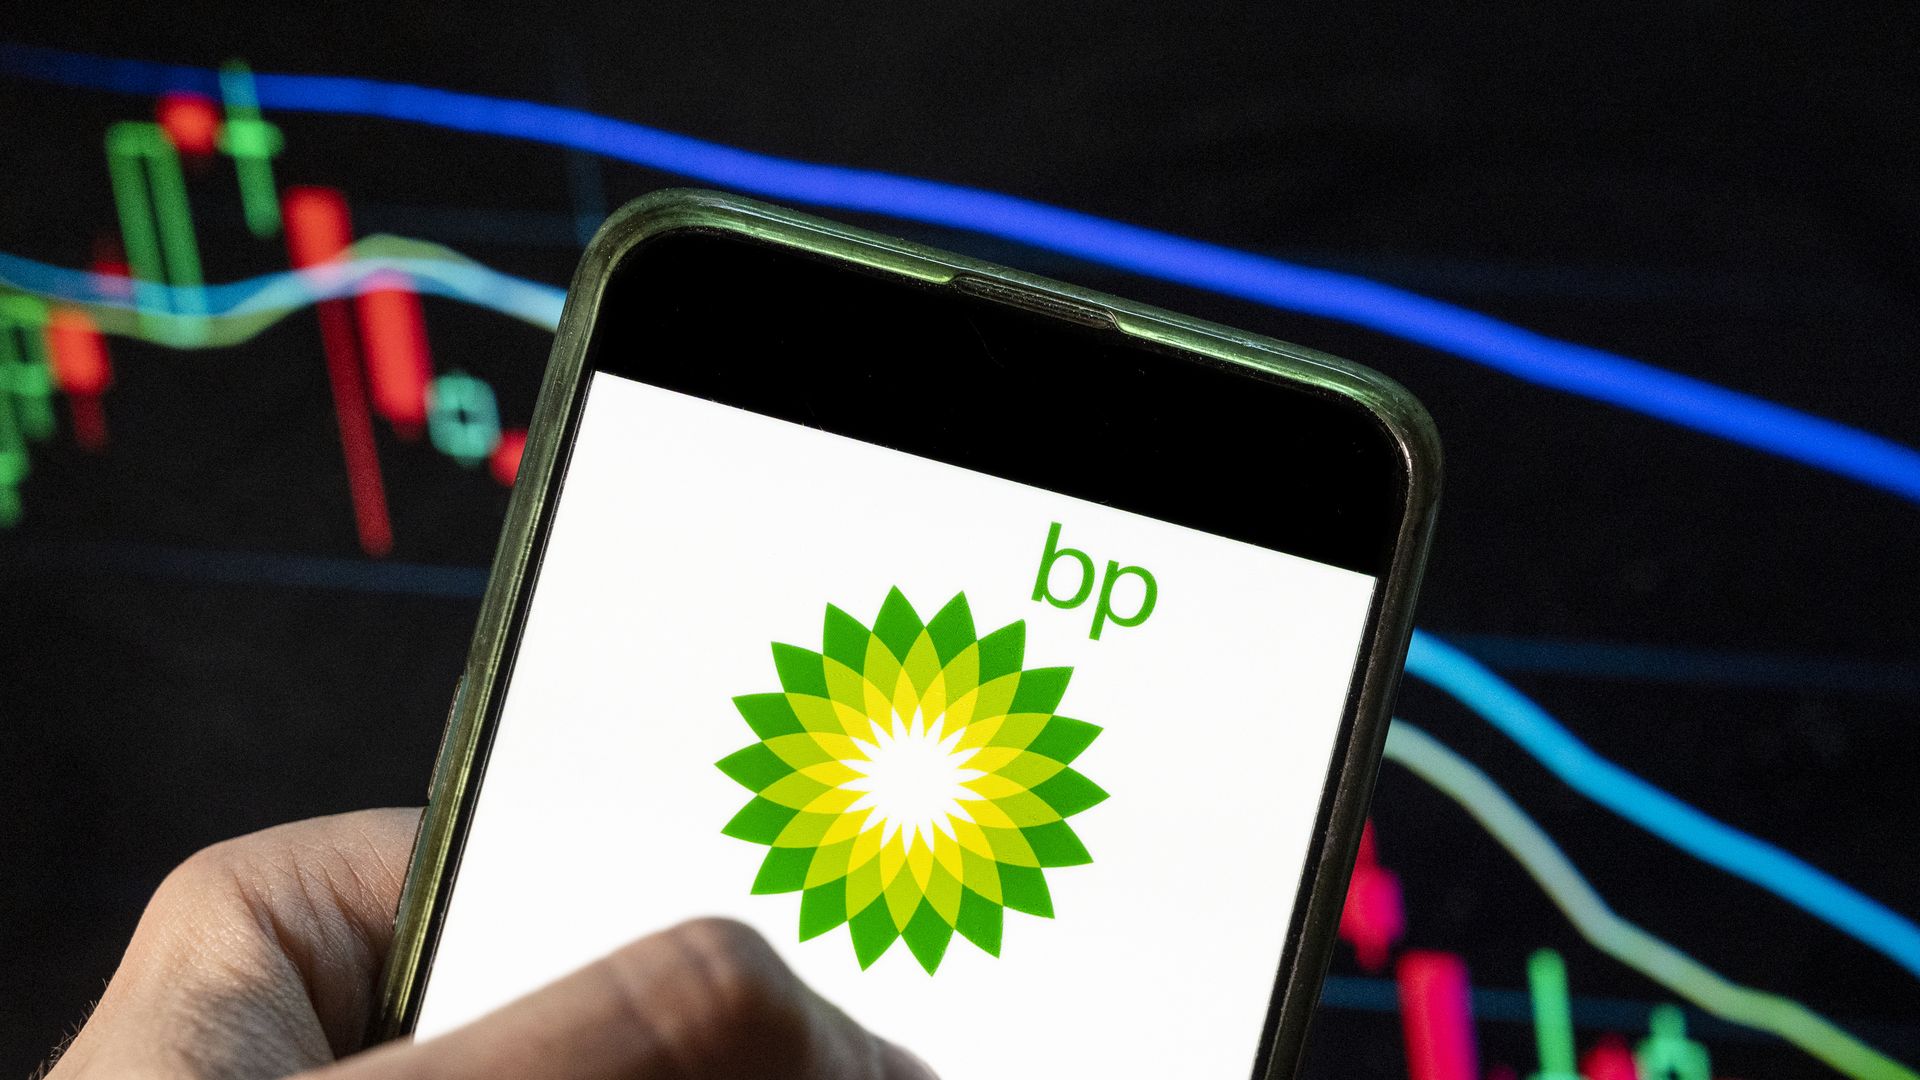 Photo of the BP logo on a smart phone.